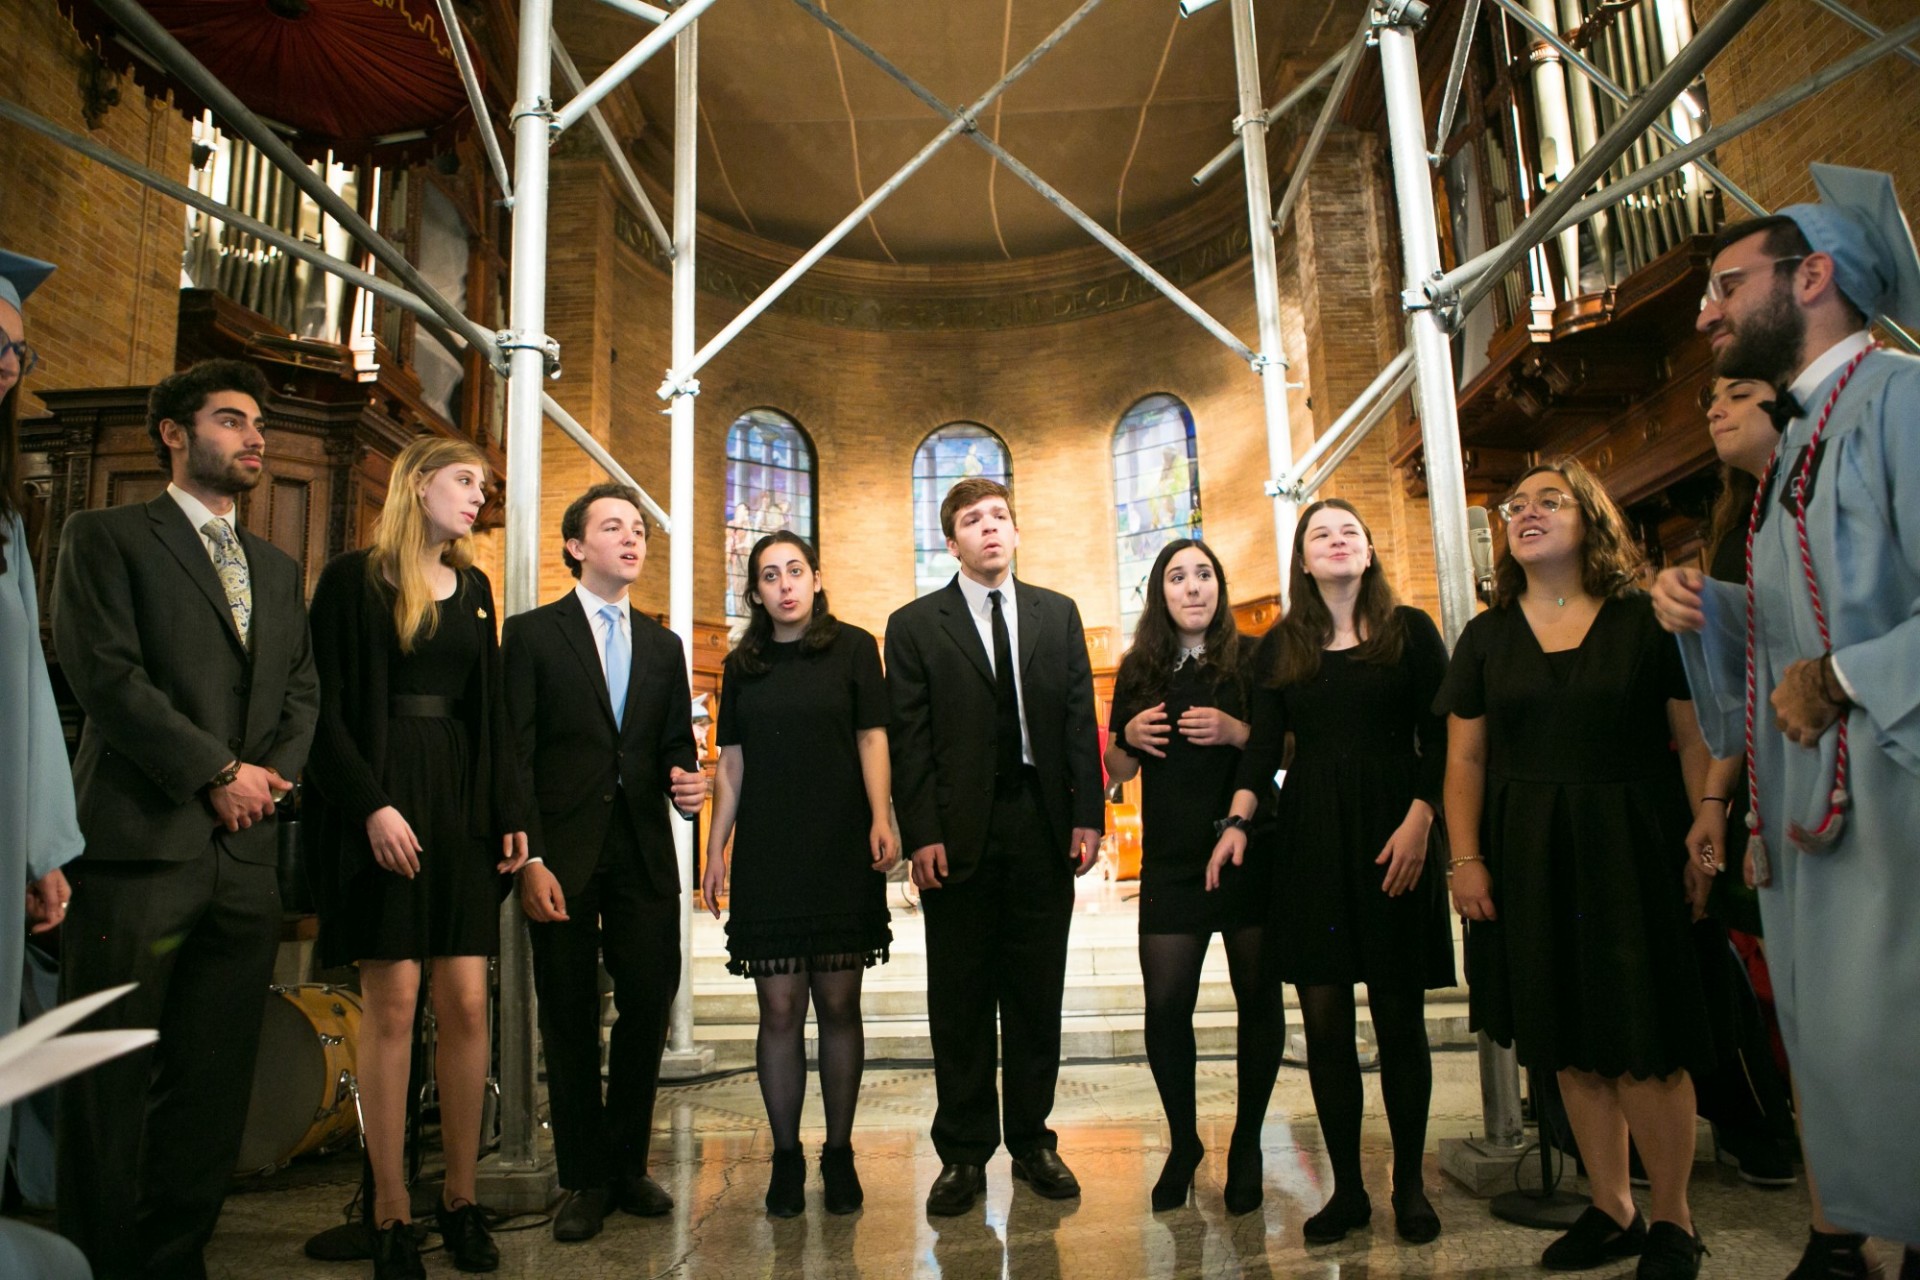 A group of students singing acapella in front of the nave in St. Paul's chapel.